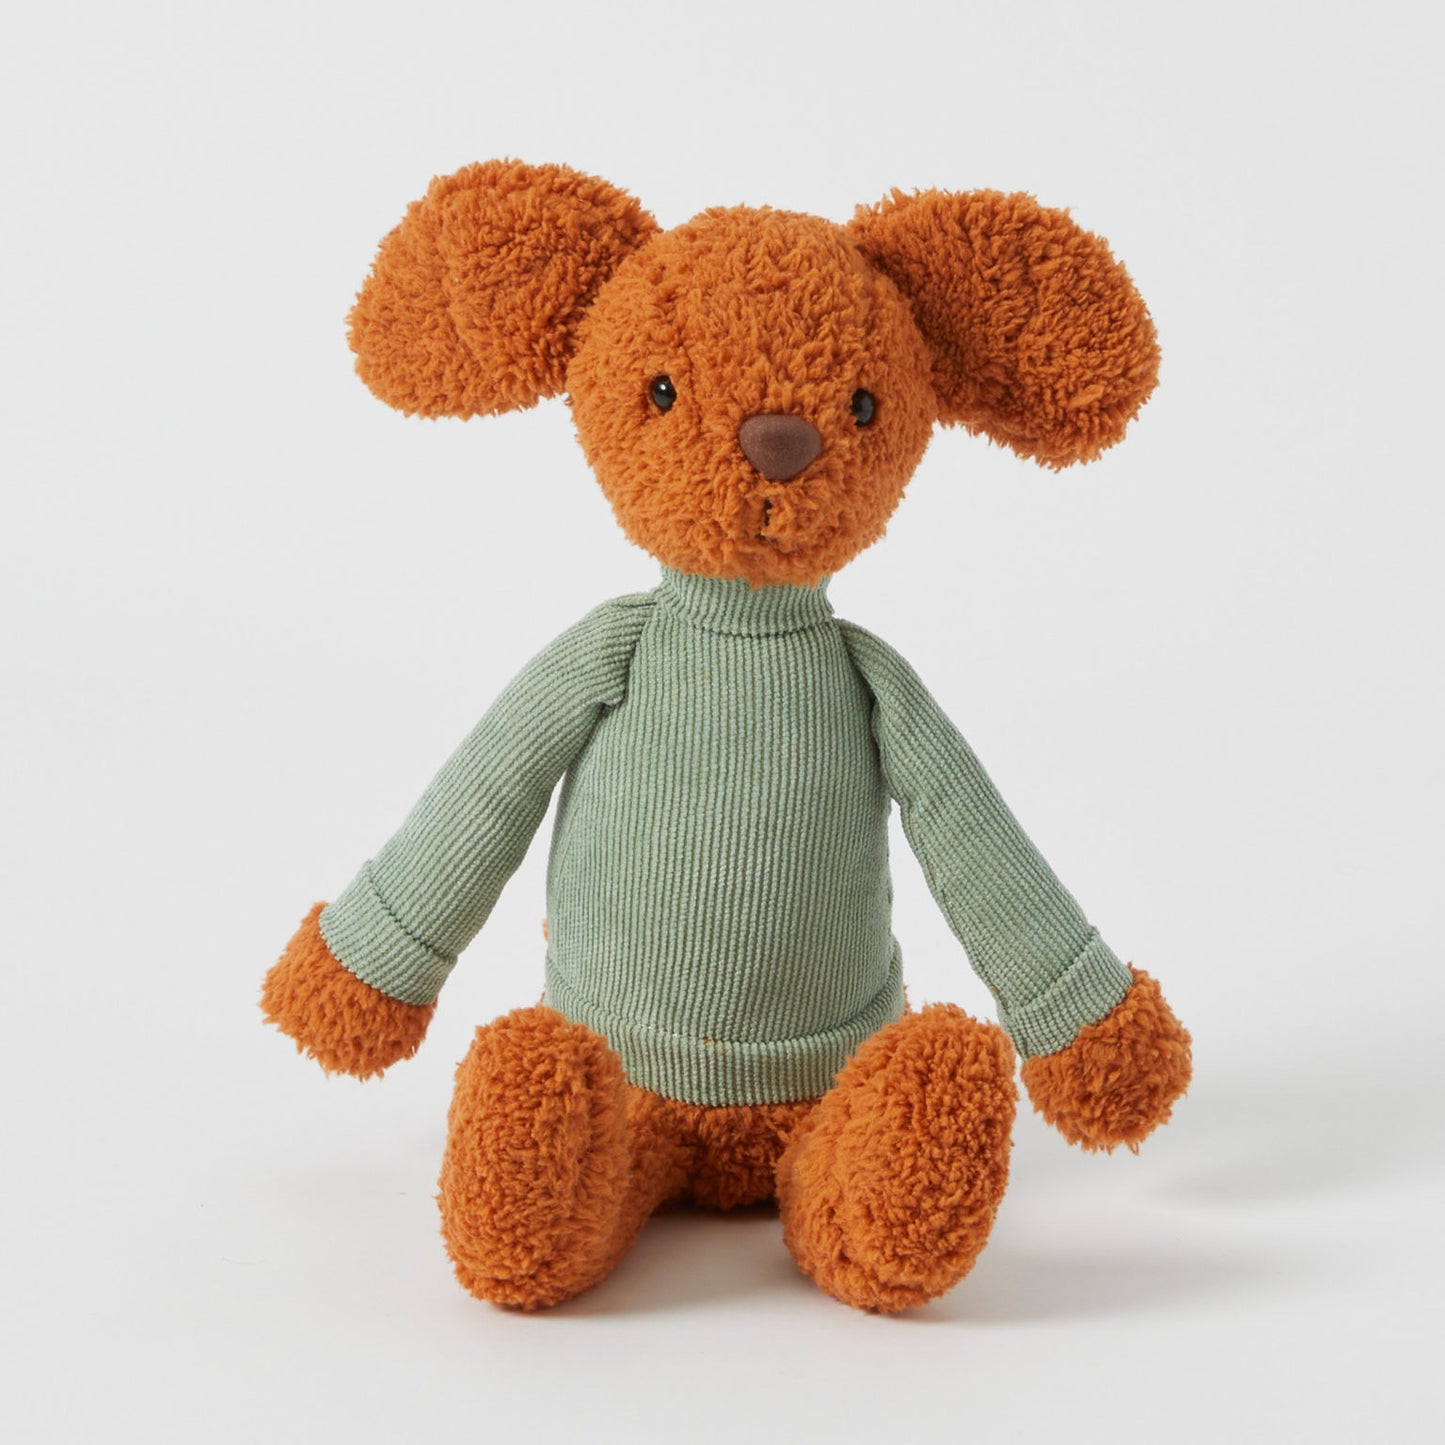 Bowie the bear pre order